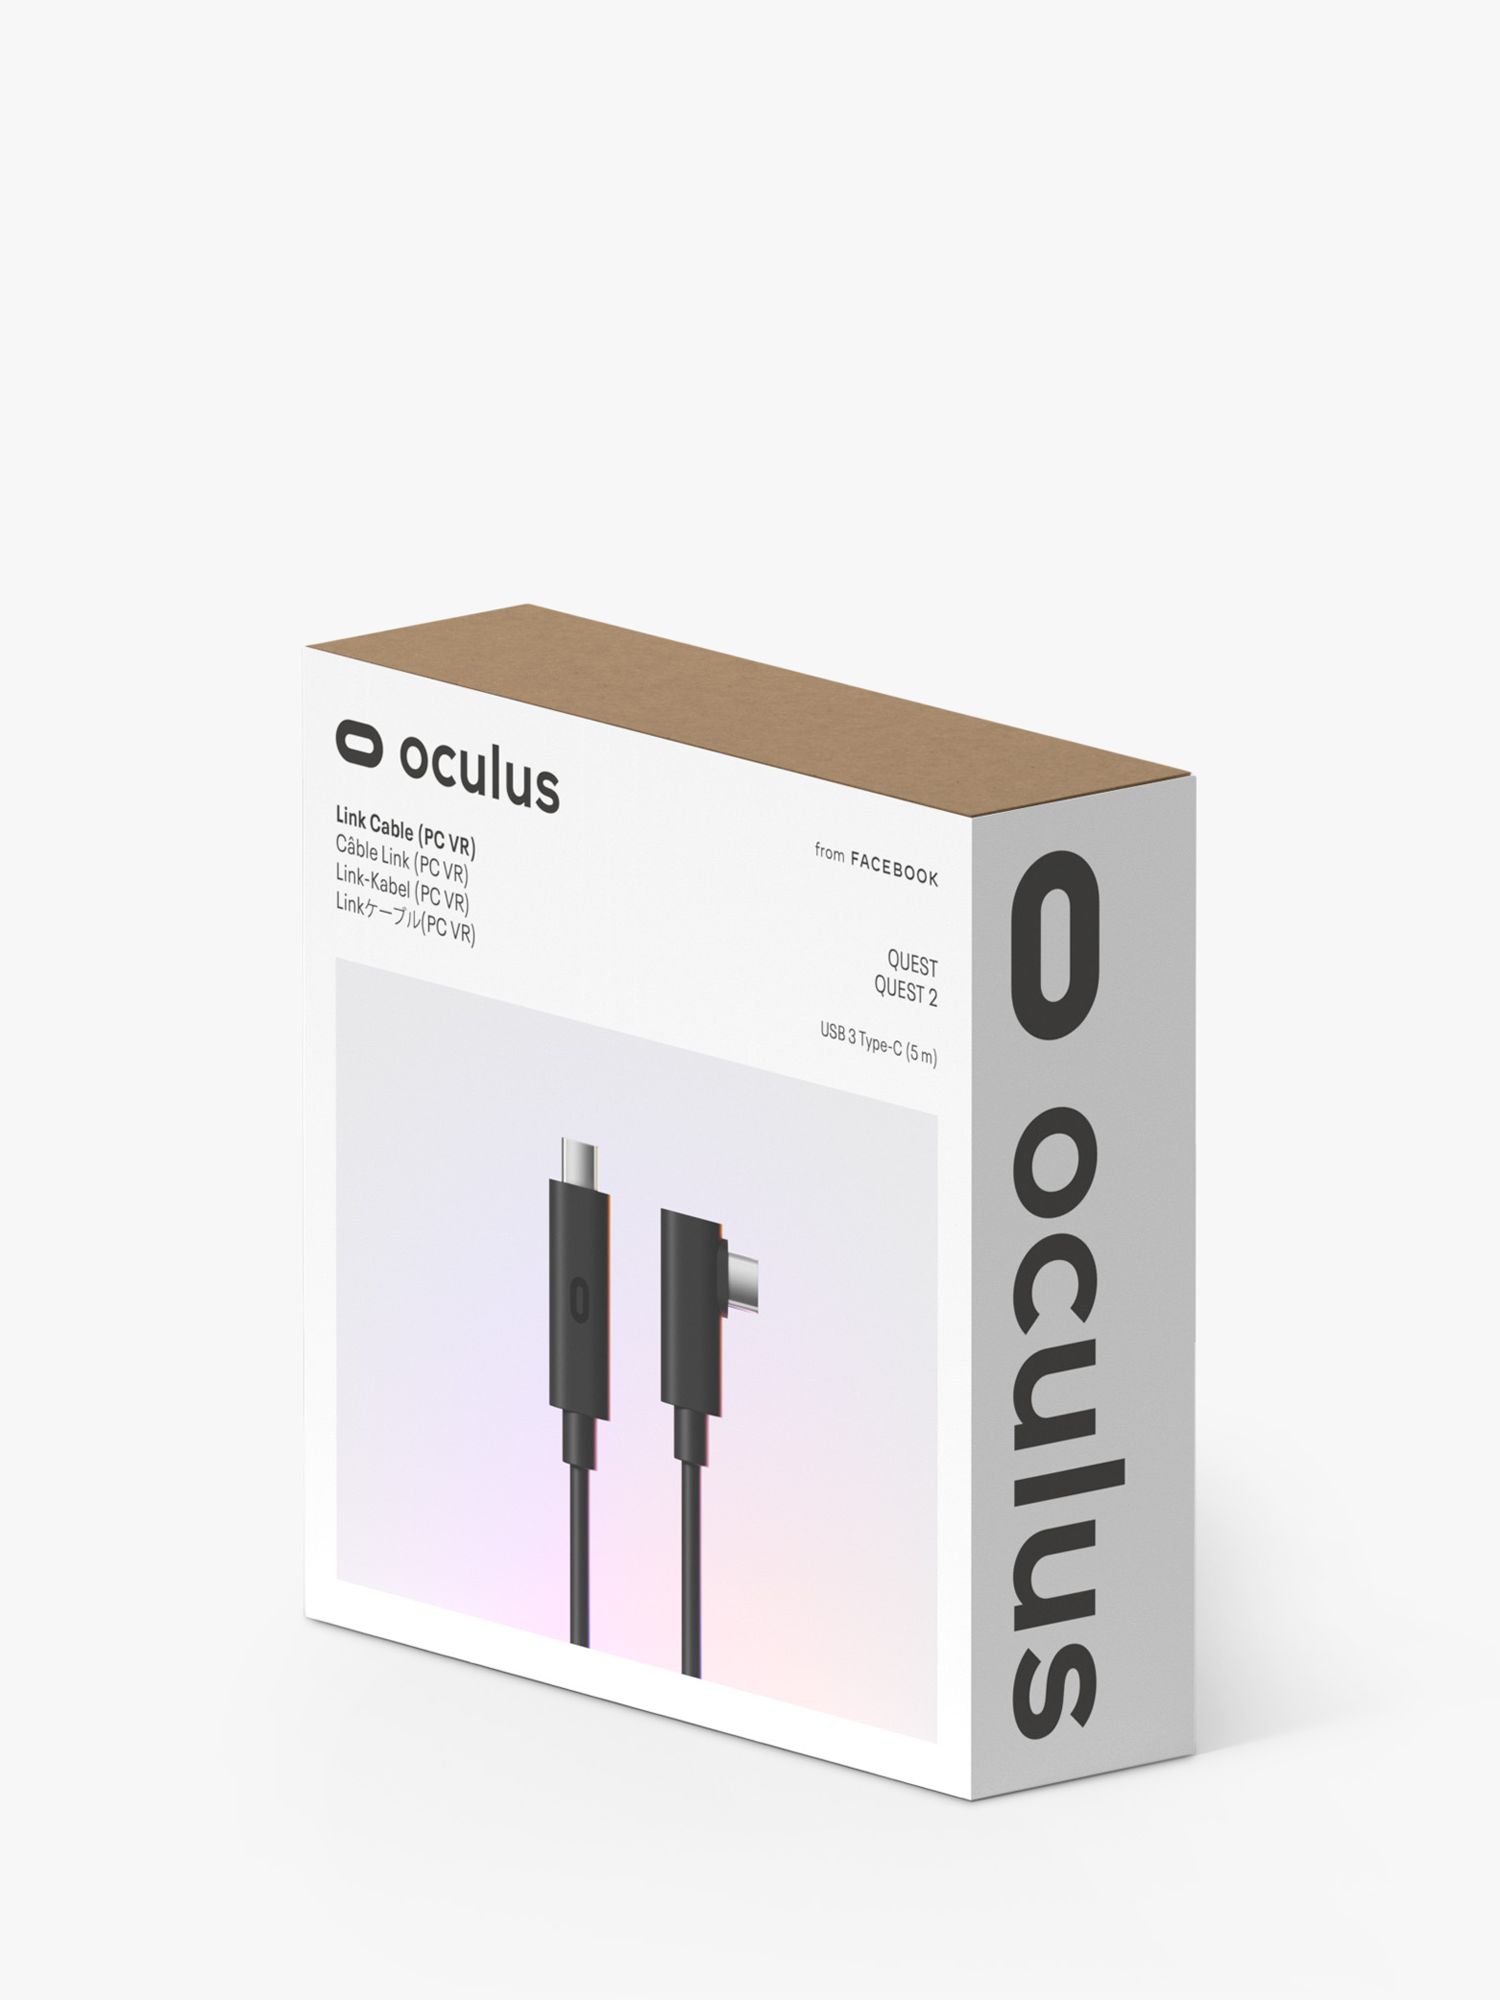 oculus link cable buy